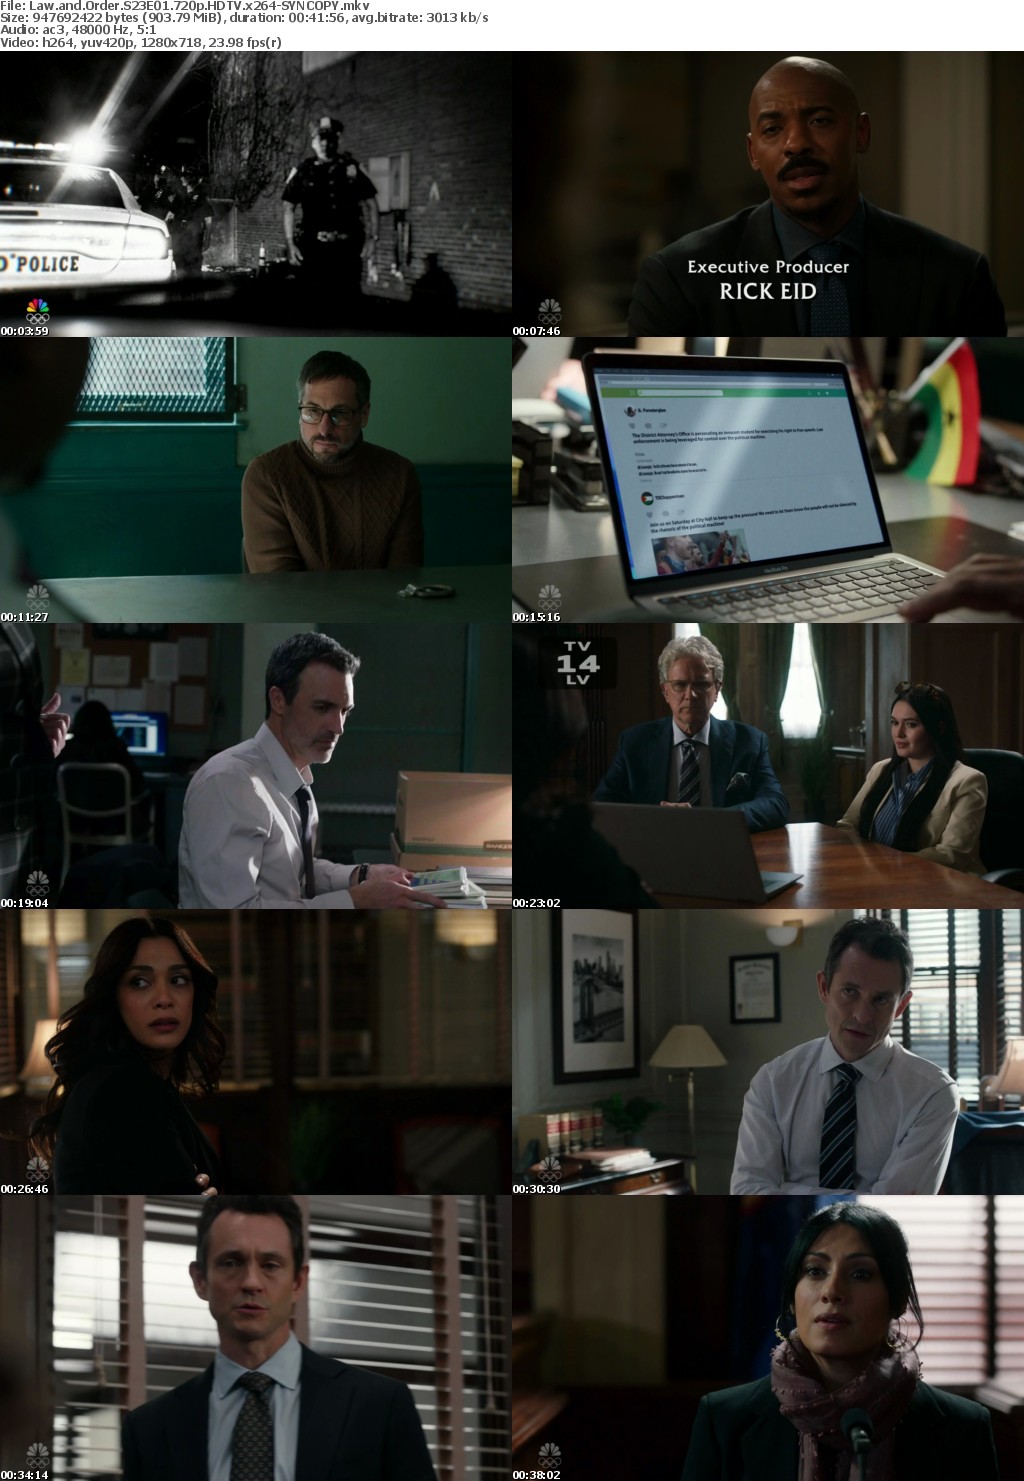 Law and Order S23E01 720p HDTV x264-SYNCOPY